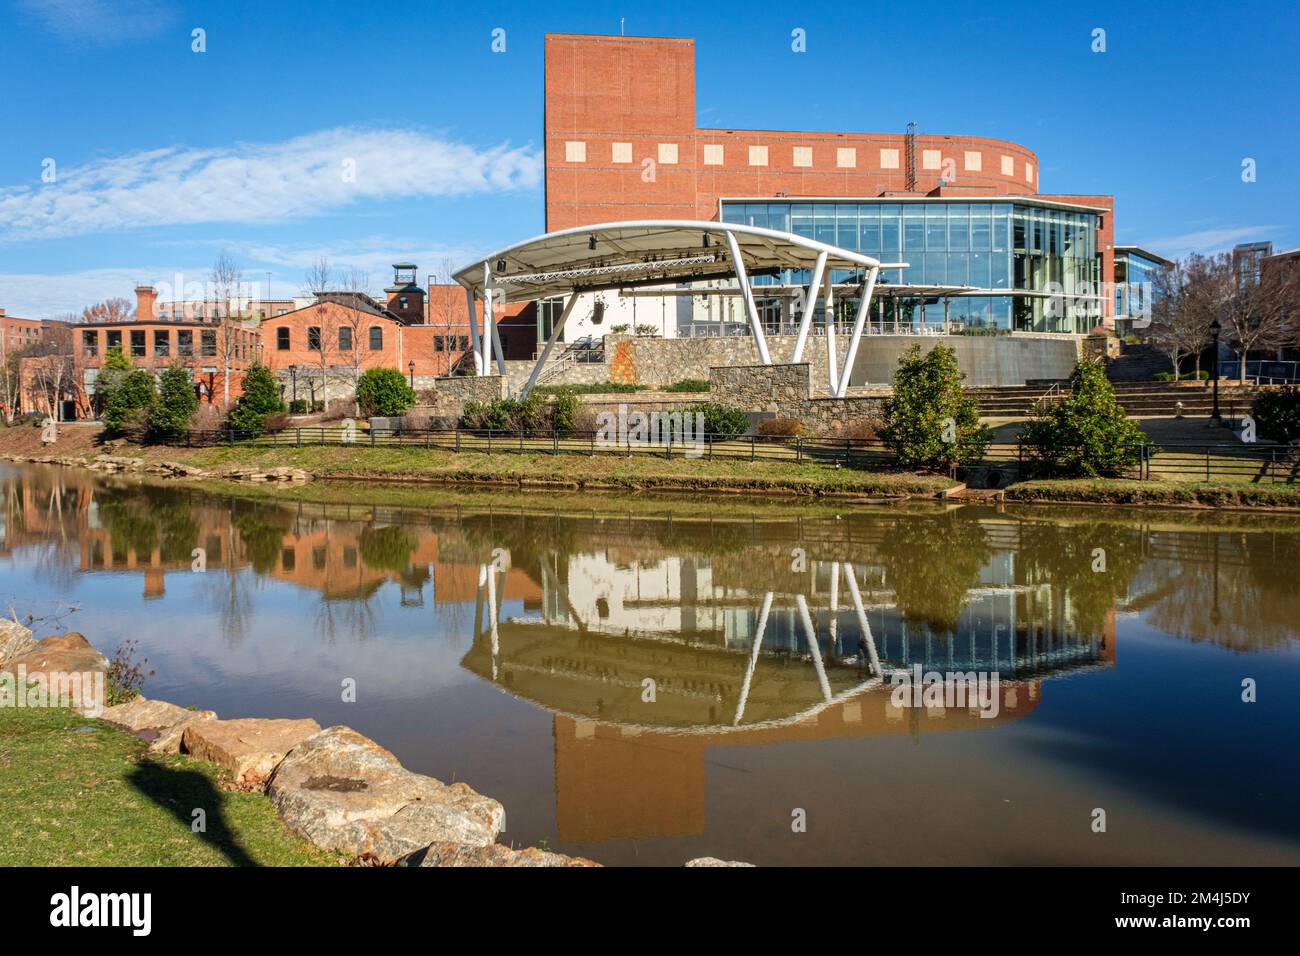 The Peace Center is reflected in the water of the Reedy River in downtown Greenville, South Carolina. Stock Photo